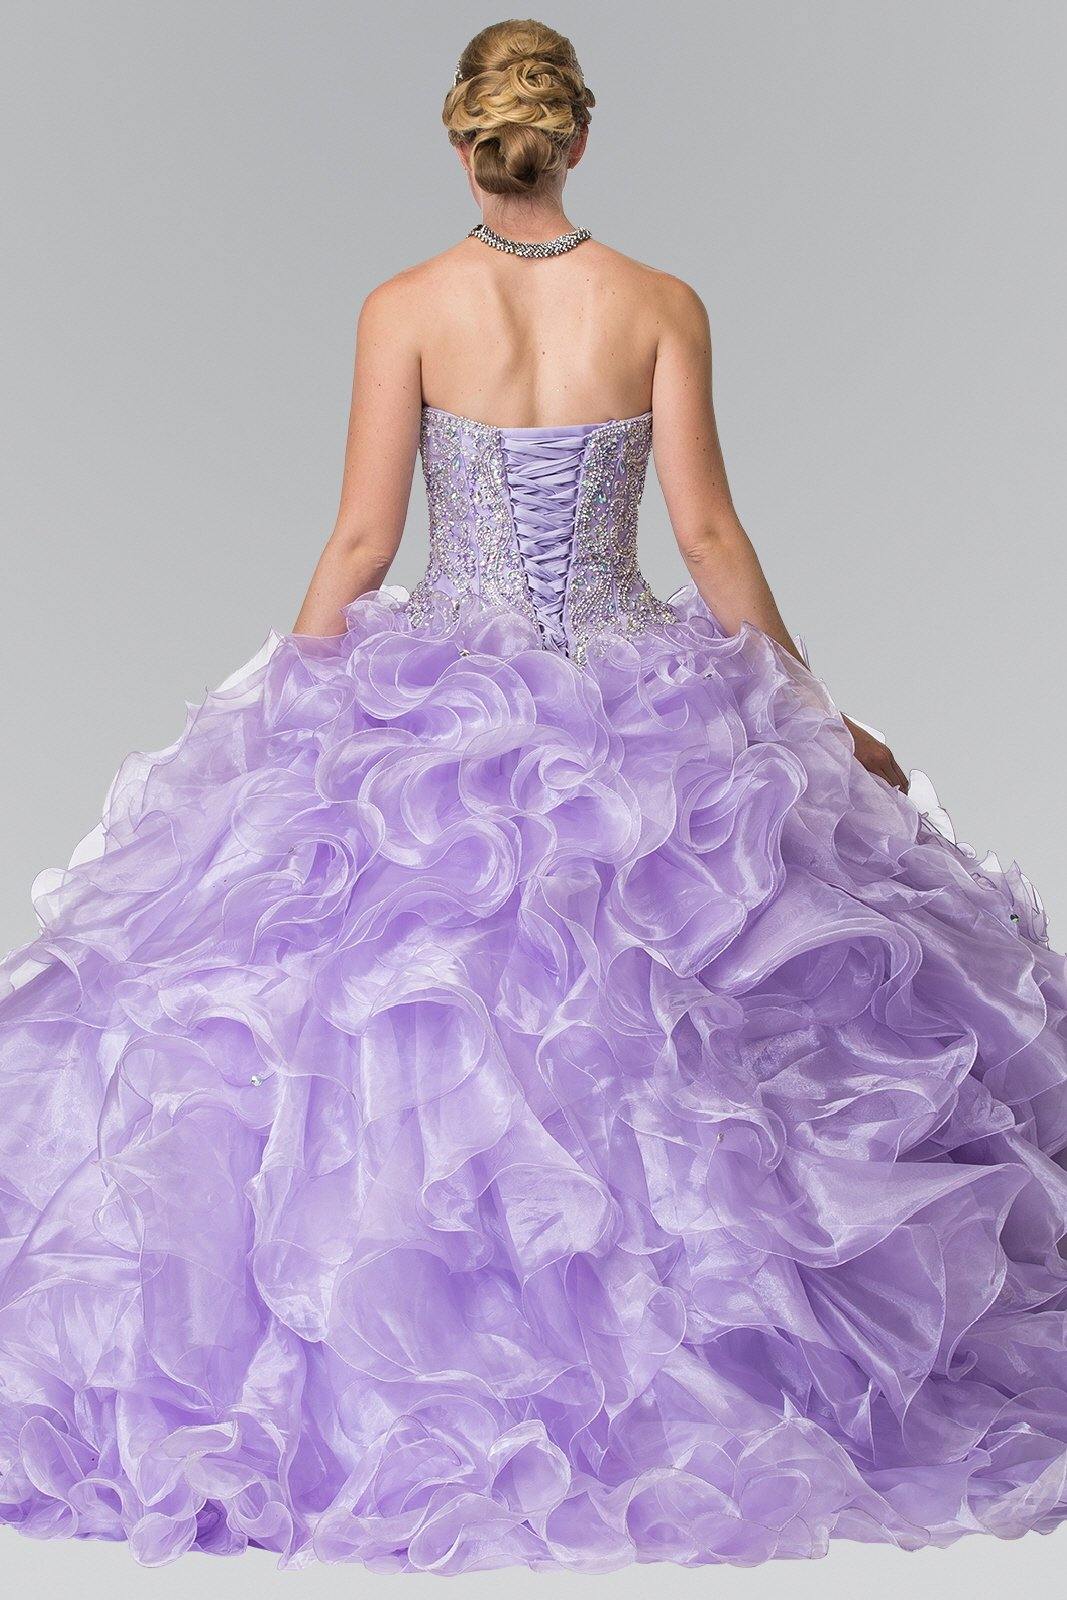 Beads Embellished Ruffled Organza Long Quinceanera Dress - The Dress Outlet Elizabeth K